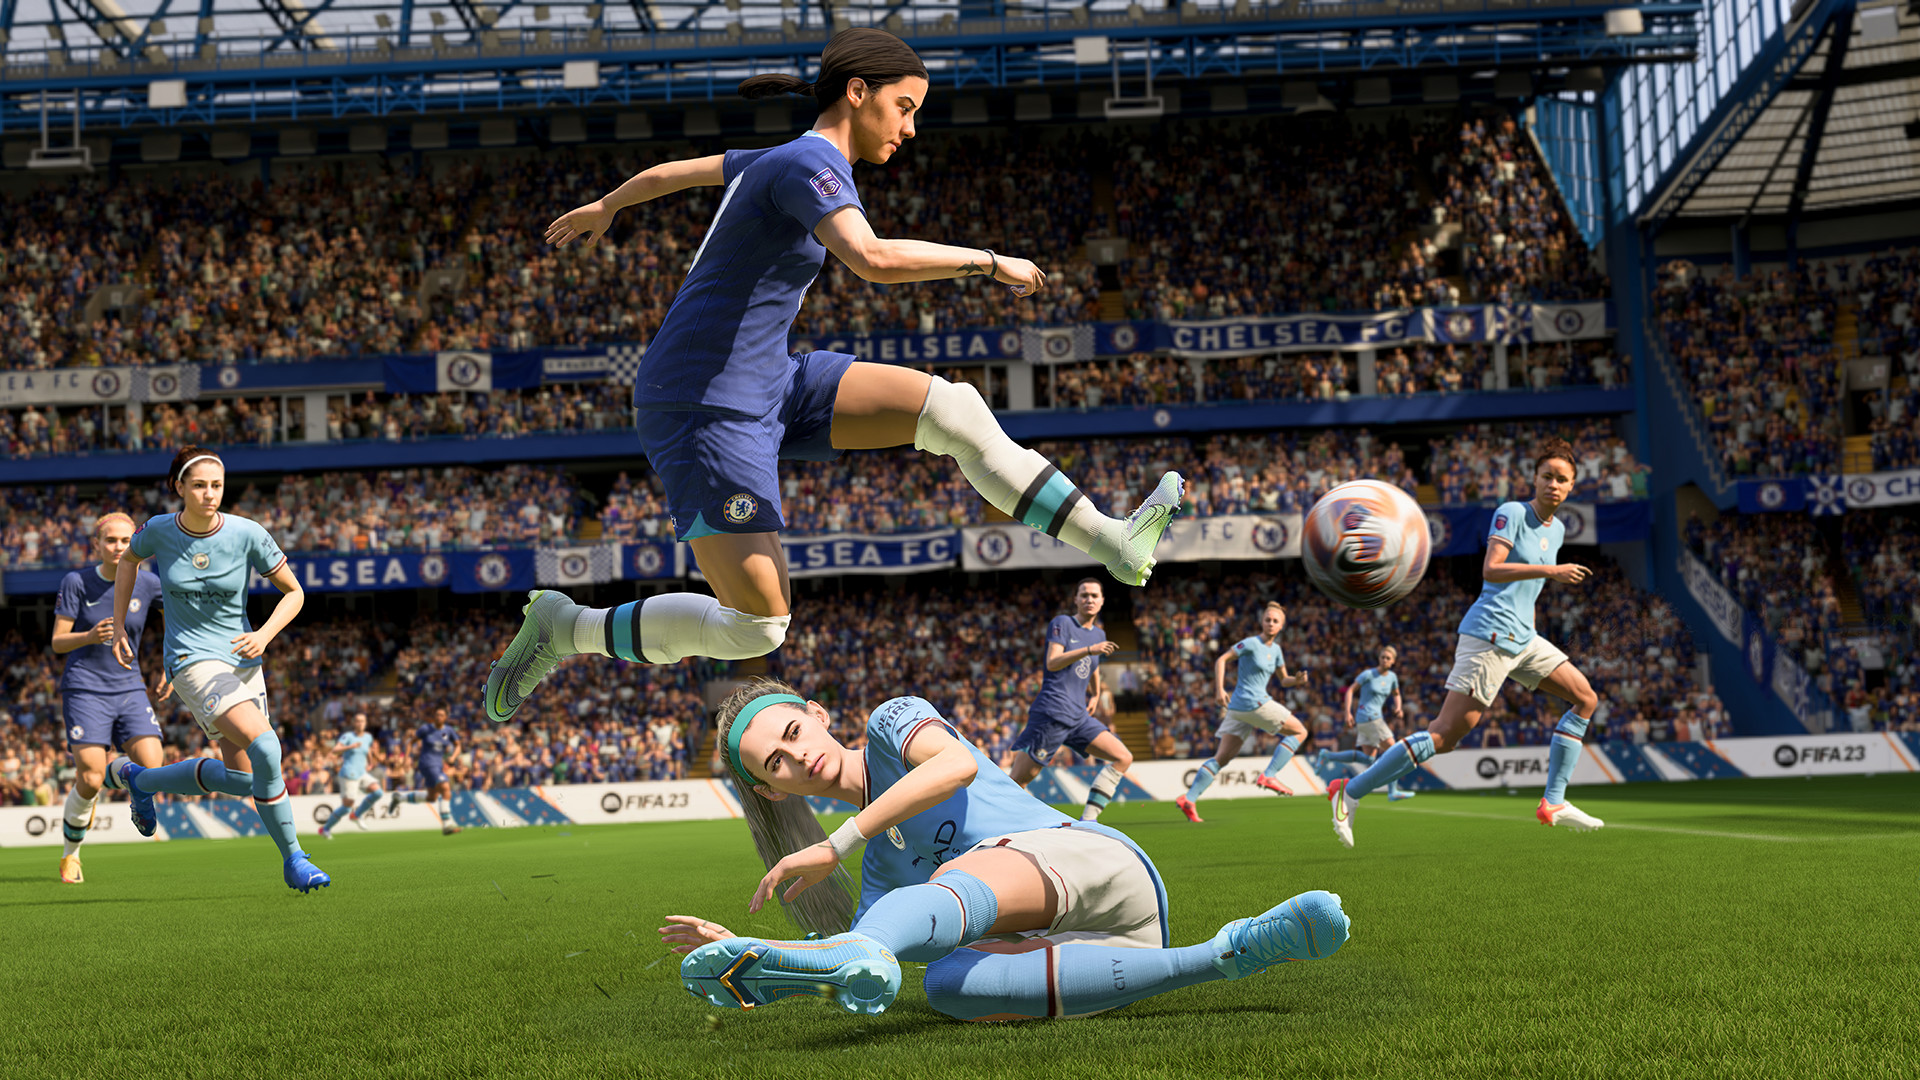  FIFA 23 will bring back loot boxes, EA confirms as it defends the practice 